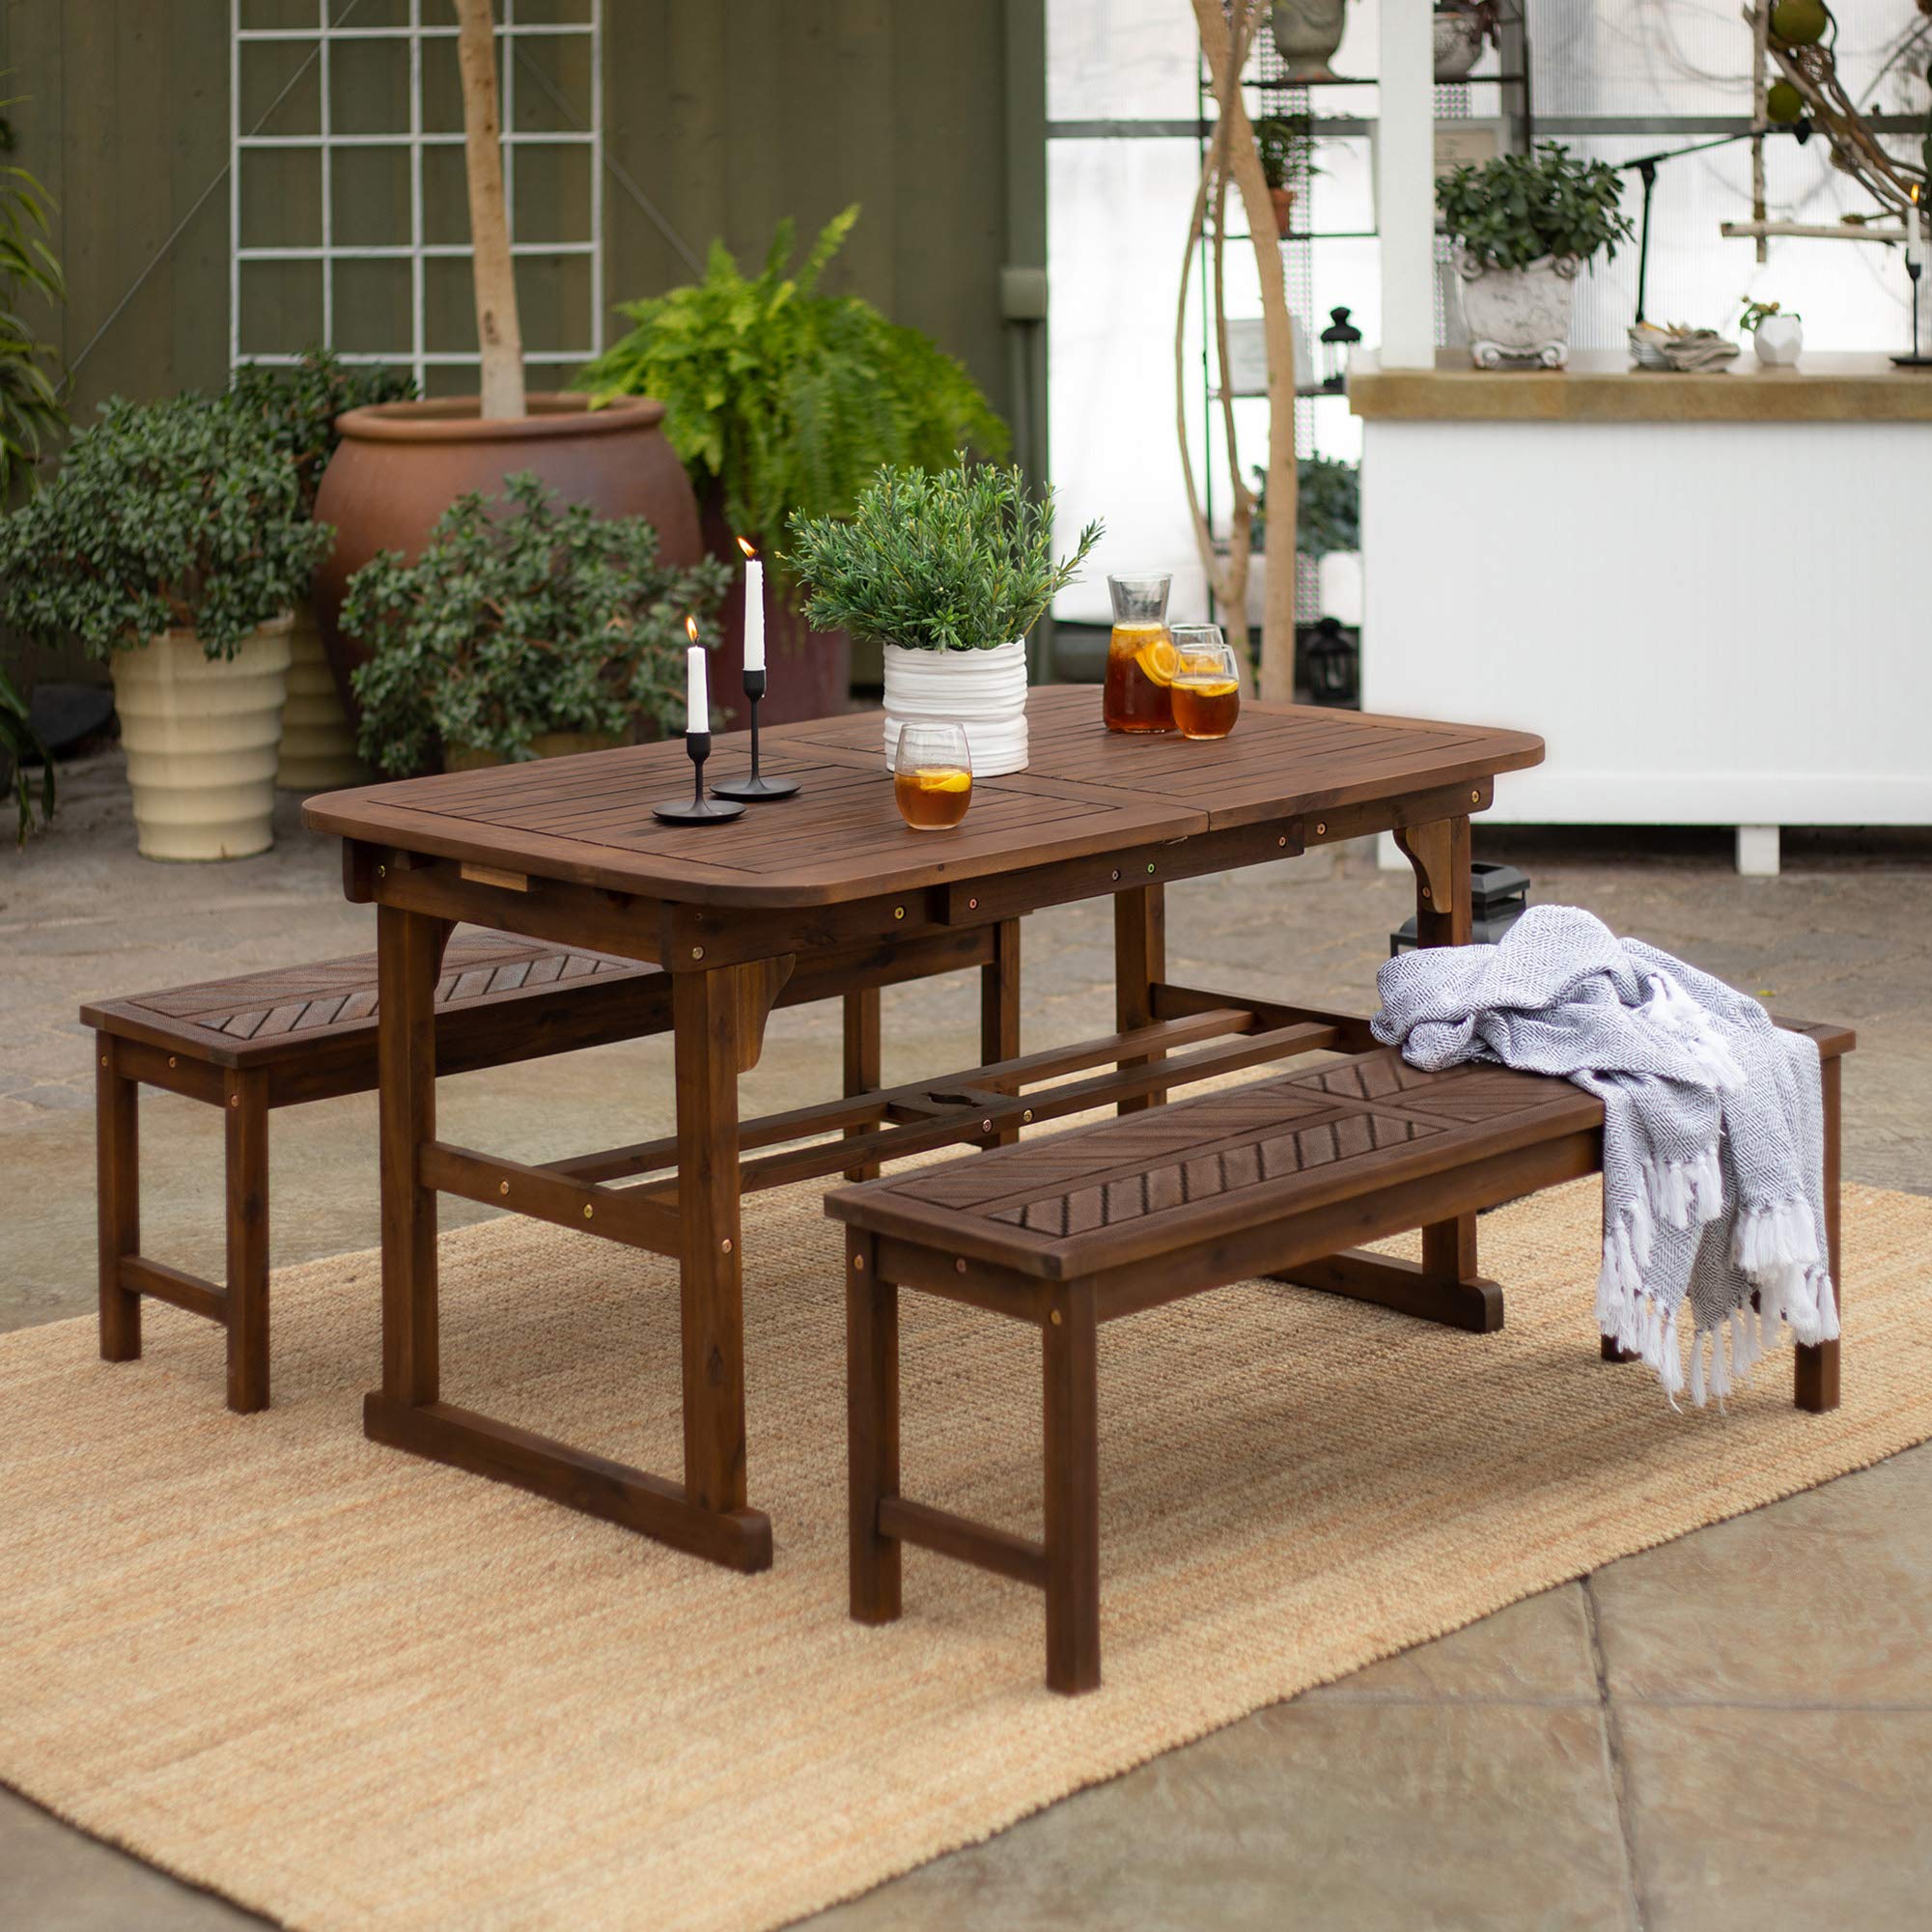 4-Piece Walker Edison Outdoor Patio Dining Extendable Table Set w/ 2 Benches (Dark Brown) $444 + Free Shipping